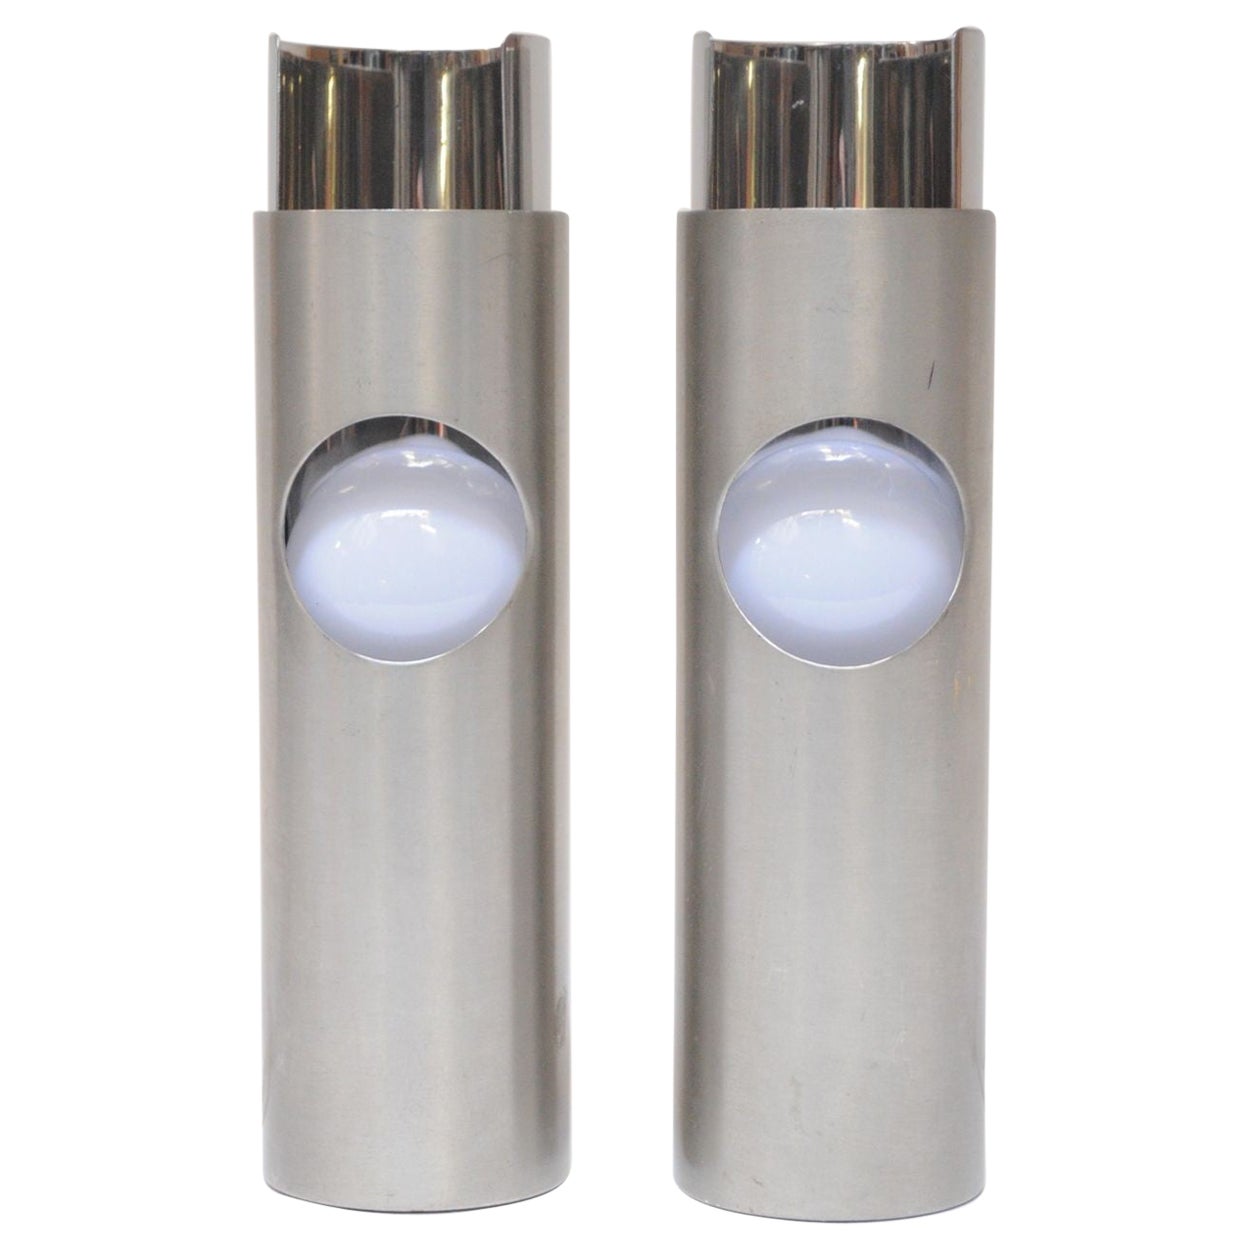 Pair of Small Italian Cylindrical Aluminum Bedside Lamps by Gaetano Missaglia